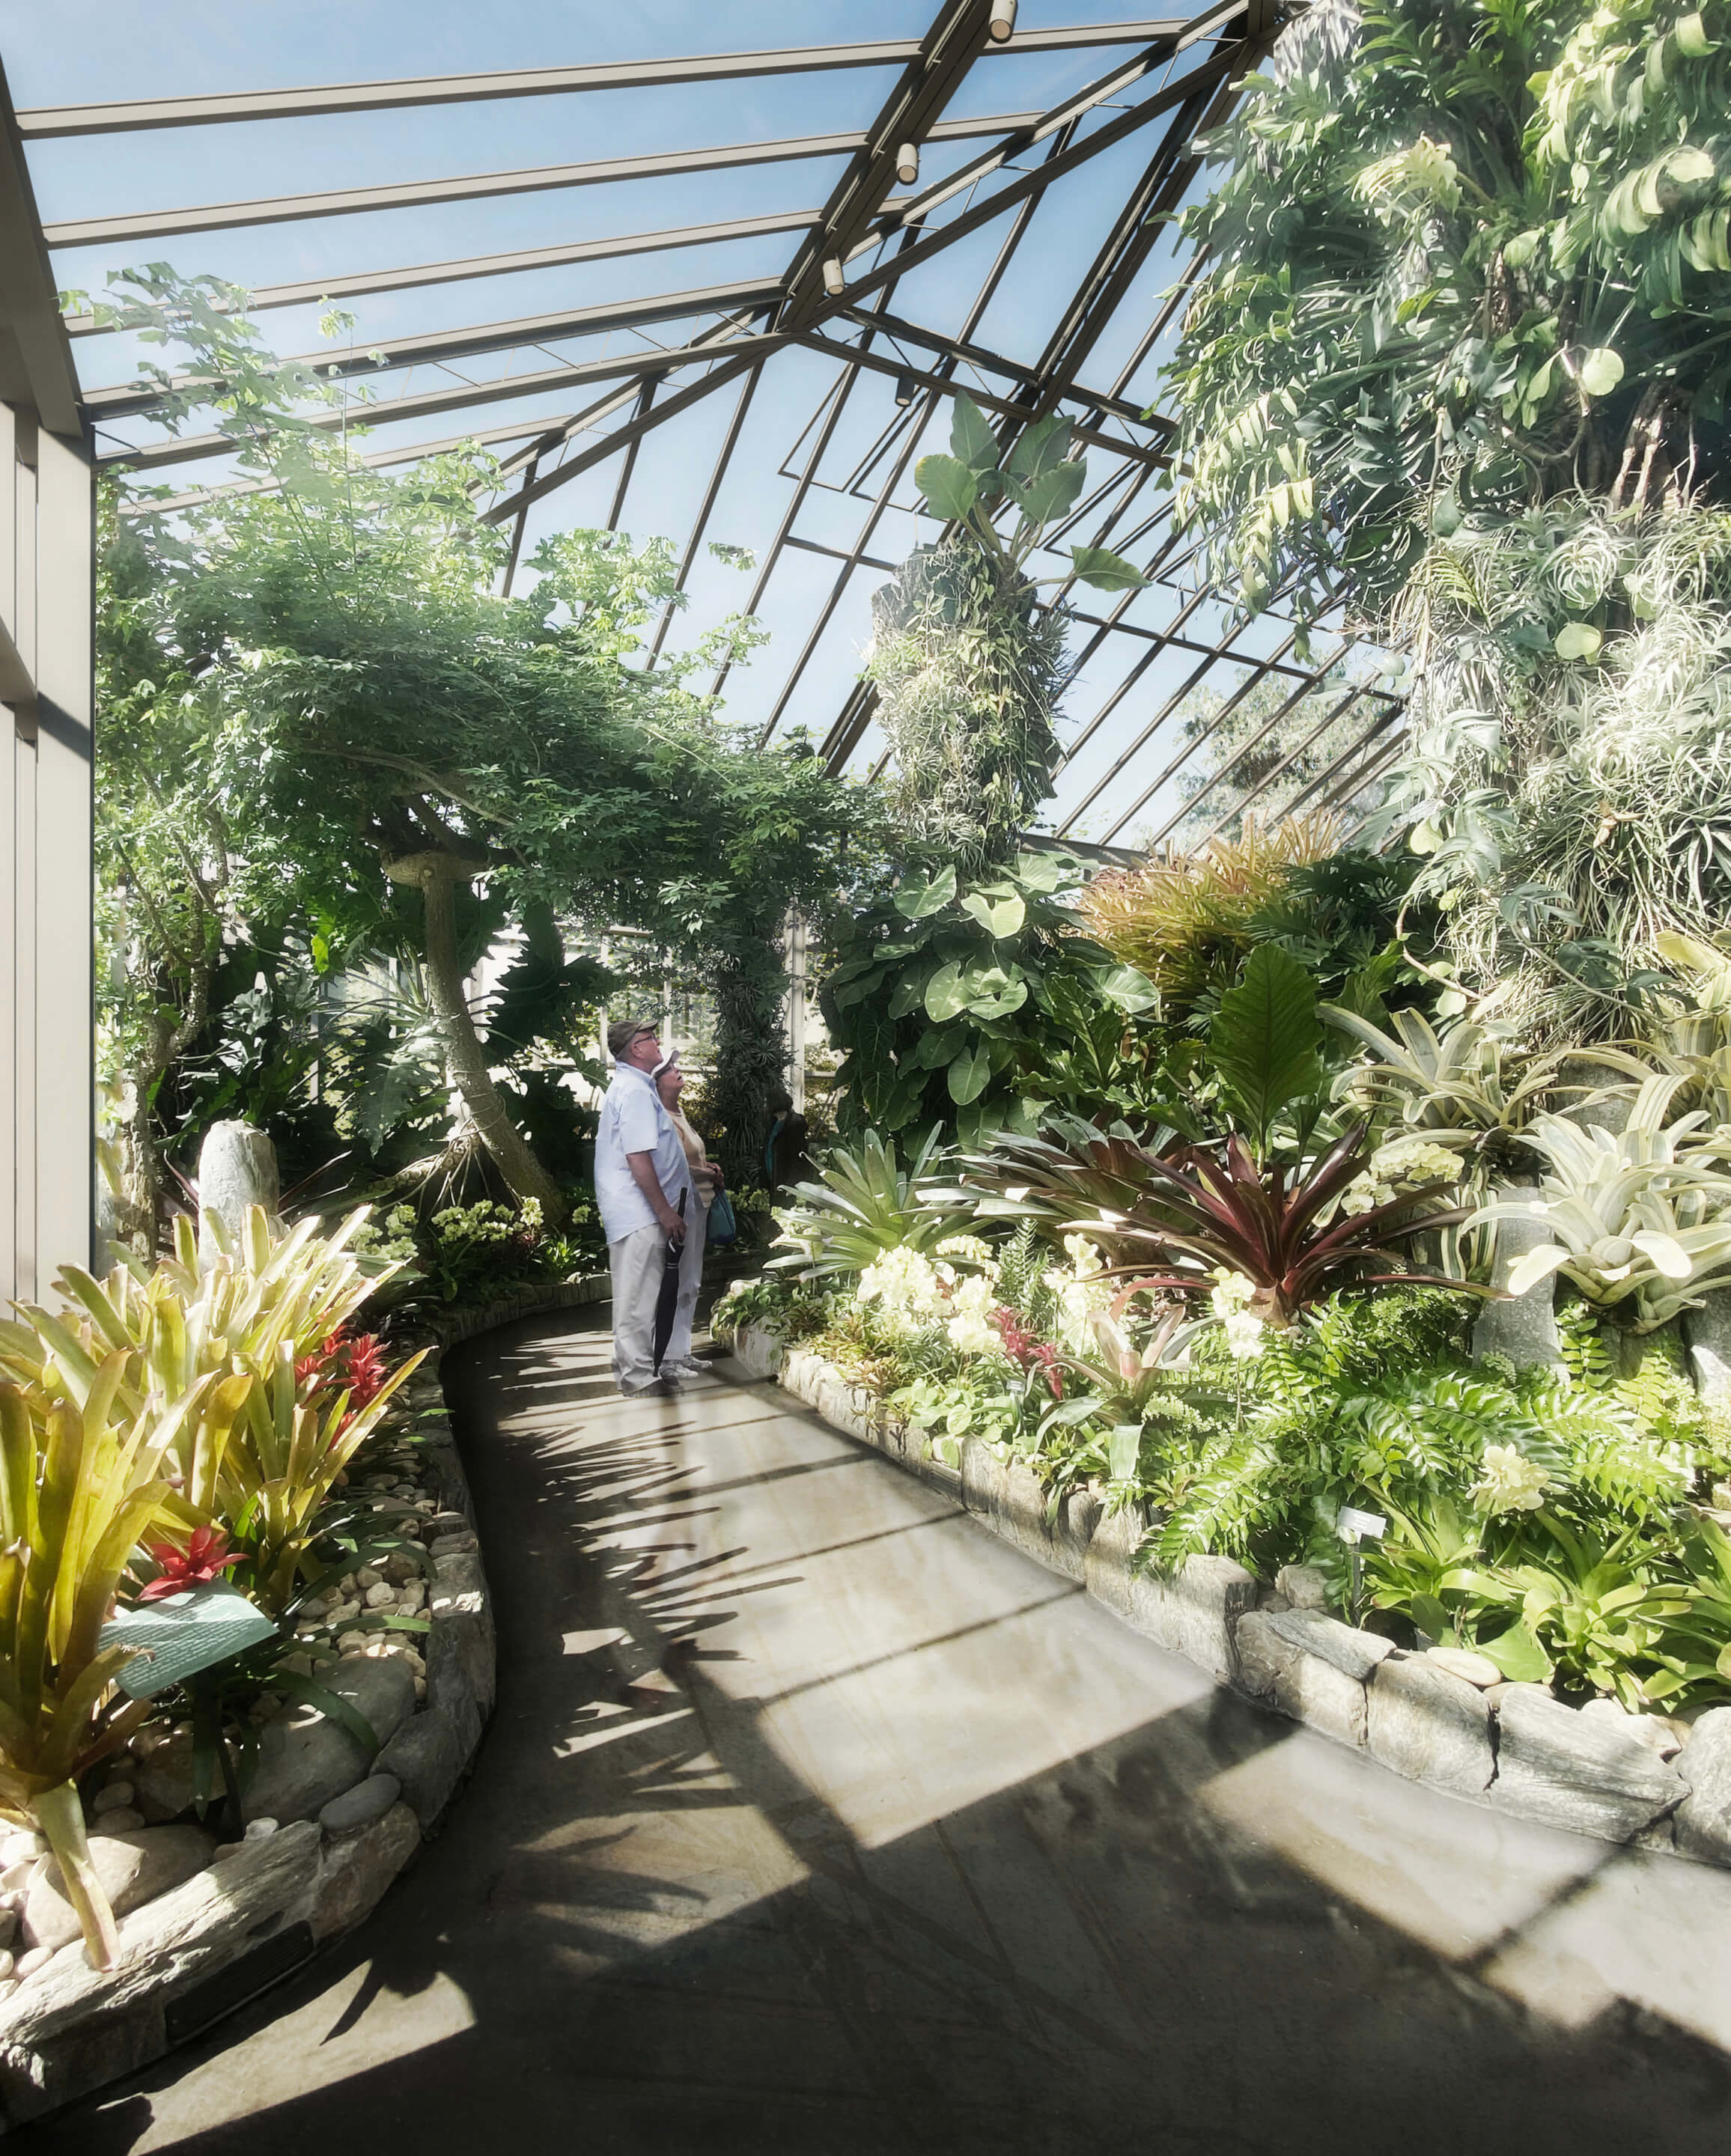 rendering of a greenhouse interior